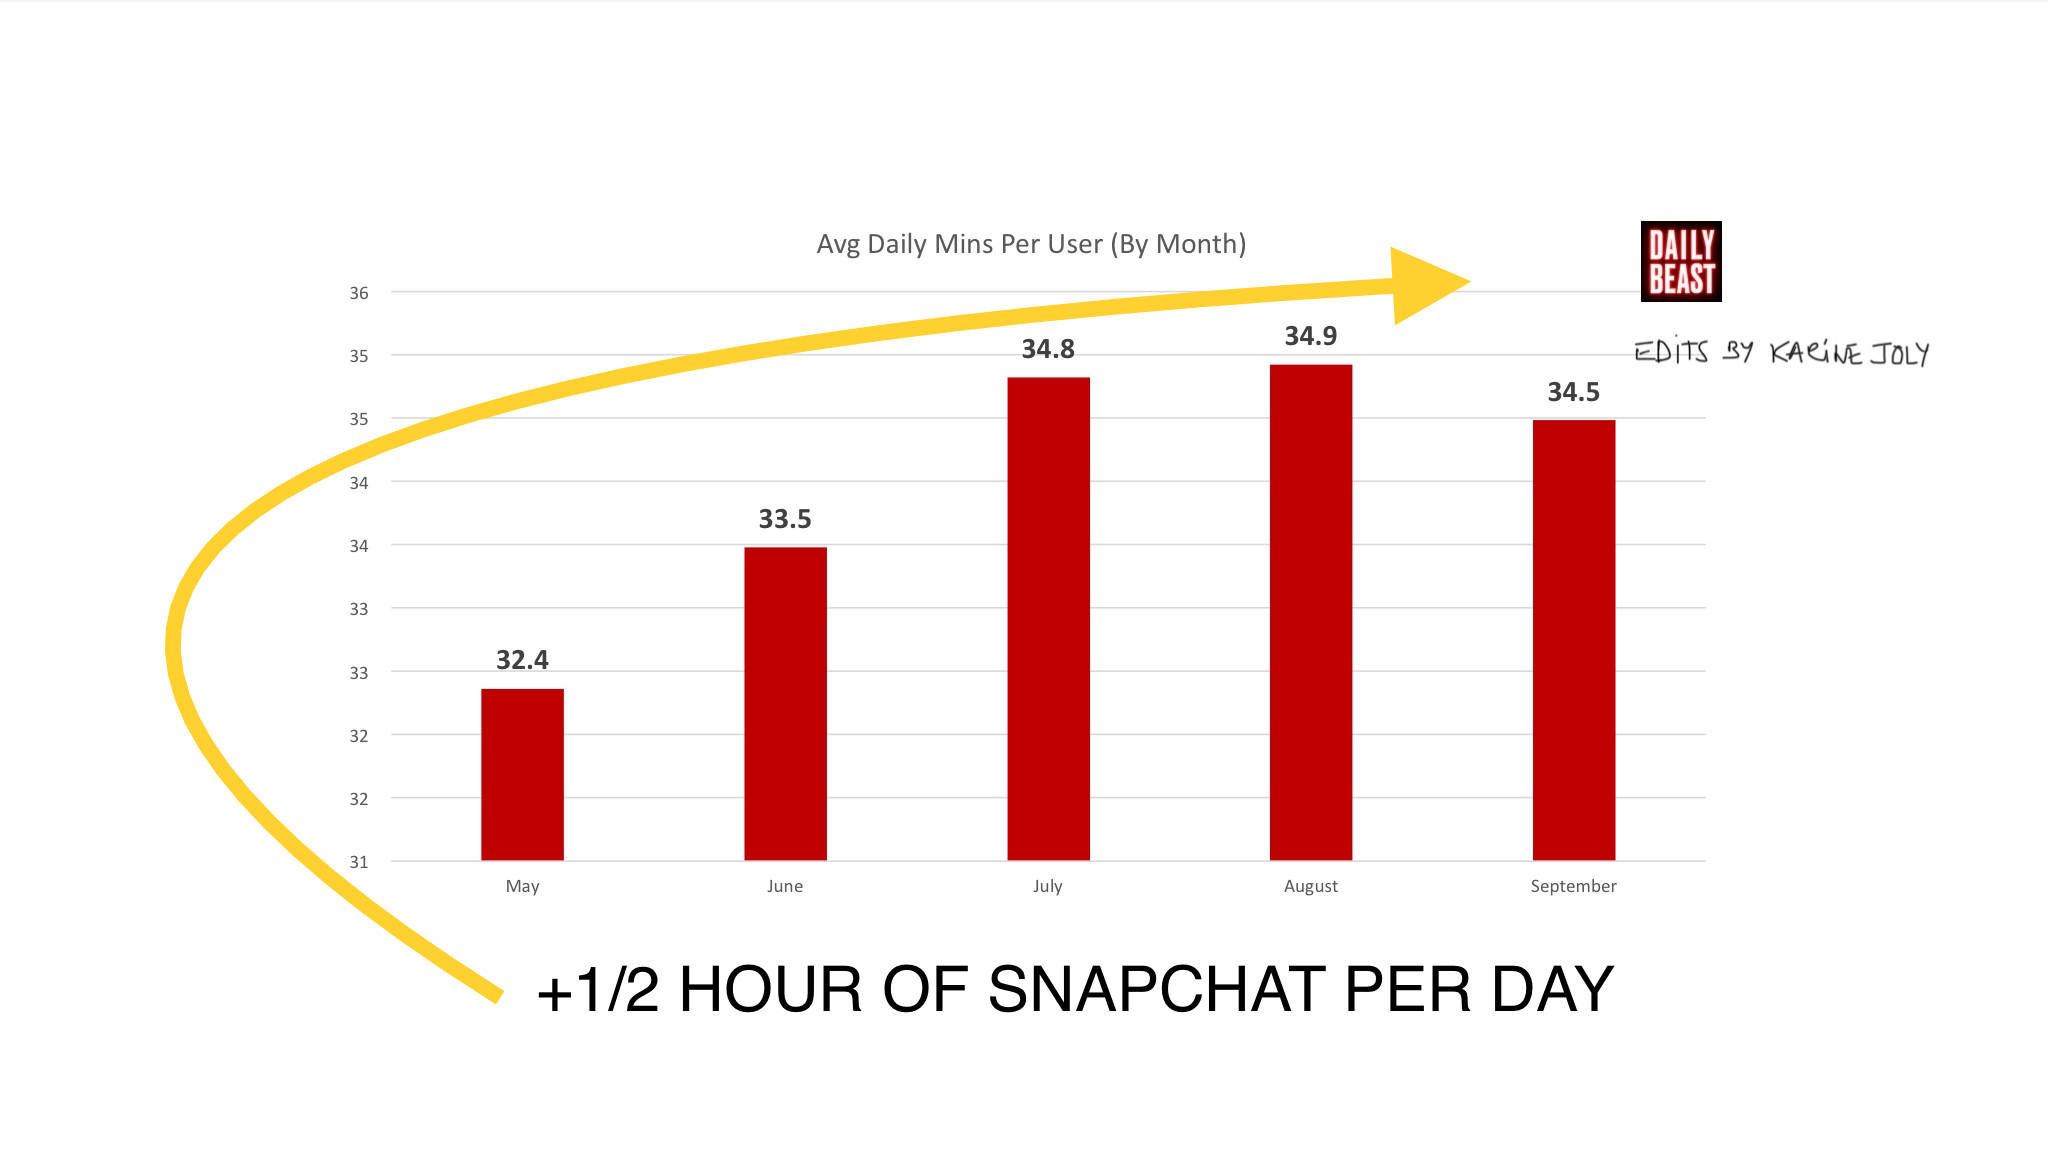 Top 5 most insightful leaked Snapchat data charts for higher ed